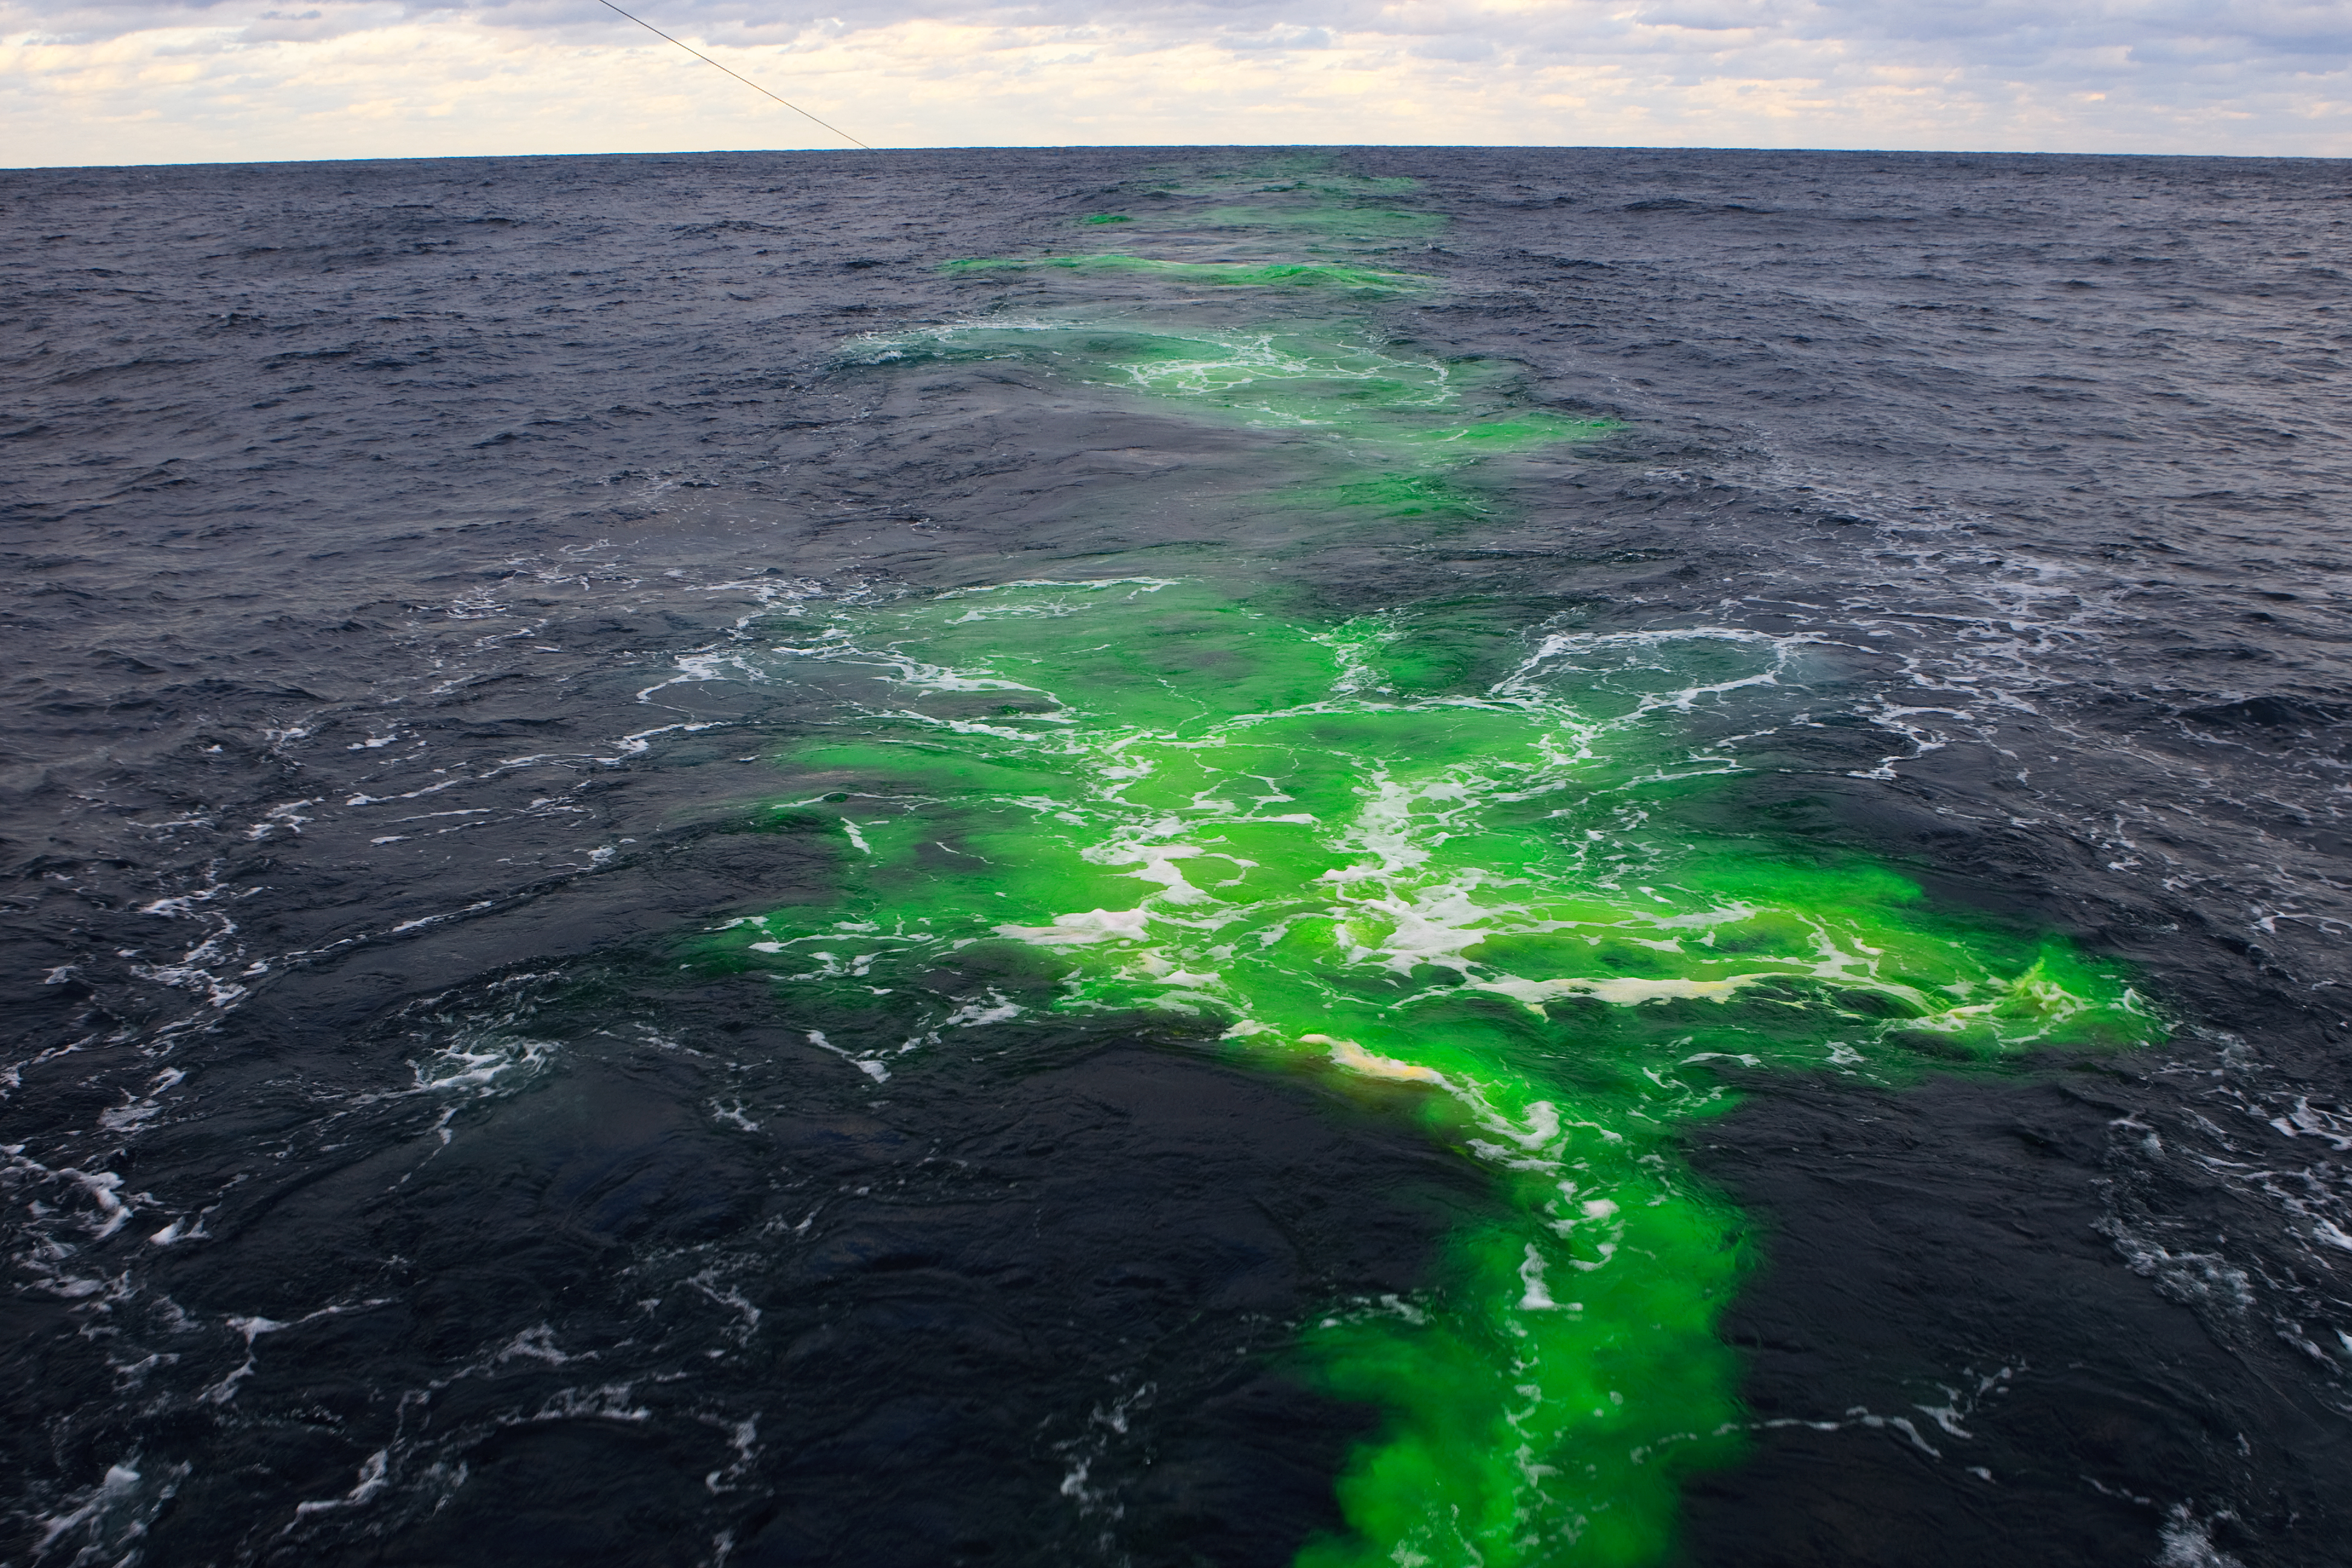 Fluorescent dye provides a unique way to track the evolution and mixing of water across the Gulf Stream. In a recent study fluorescein dye (as pictured here) was released along the north wall of the Gulf Stream, and tracked by ship as it mixed horizontally across the current. Photo credit: Lance Wills, WHOI. Click image to download hi-res version.